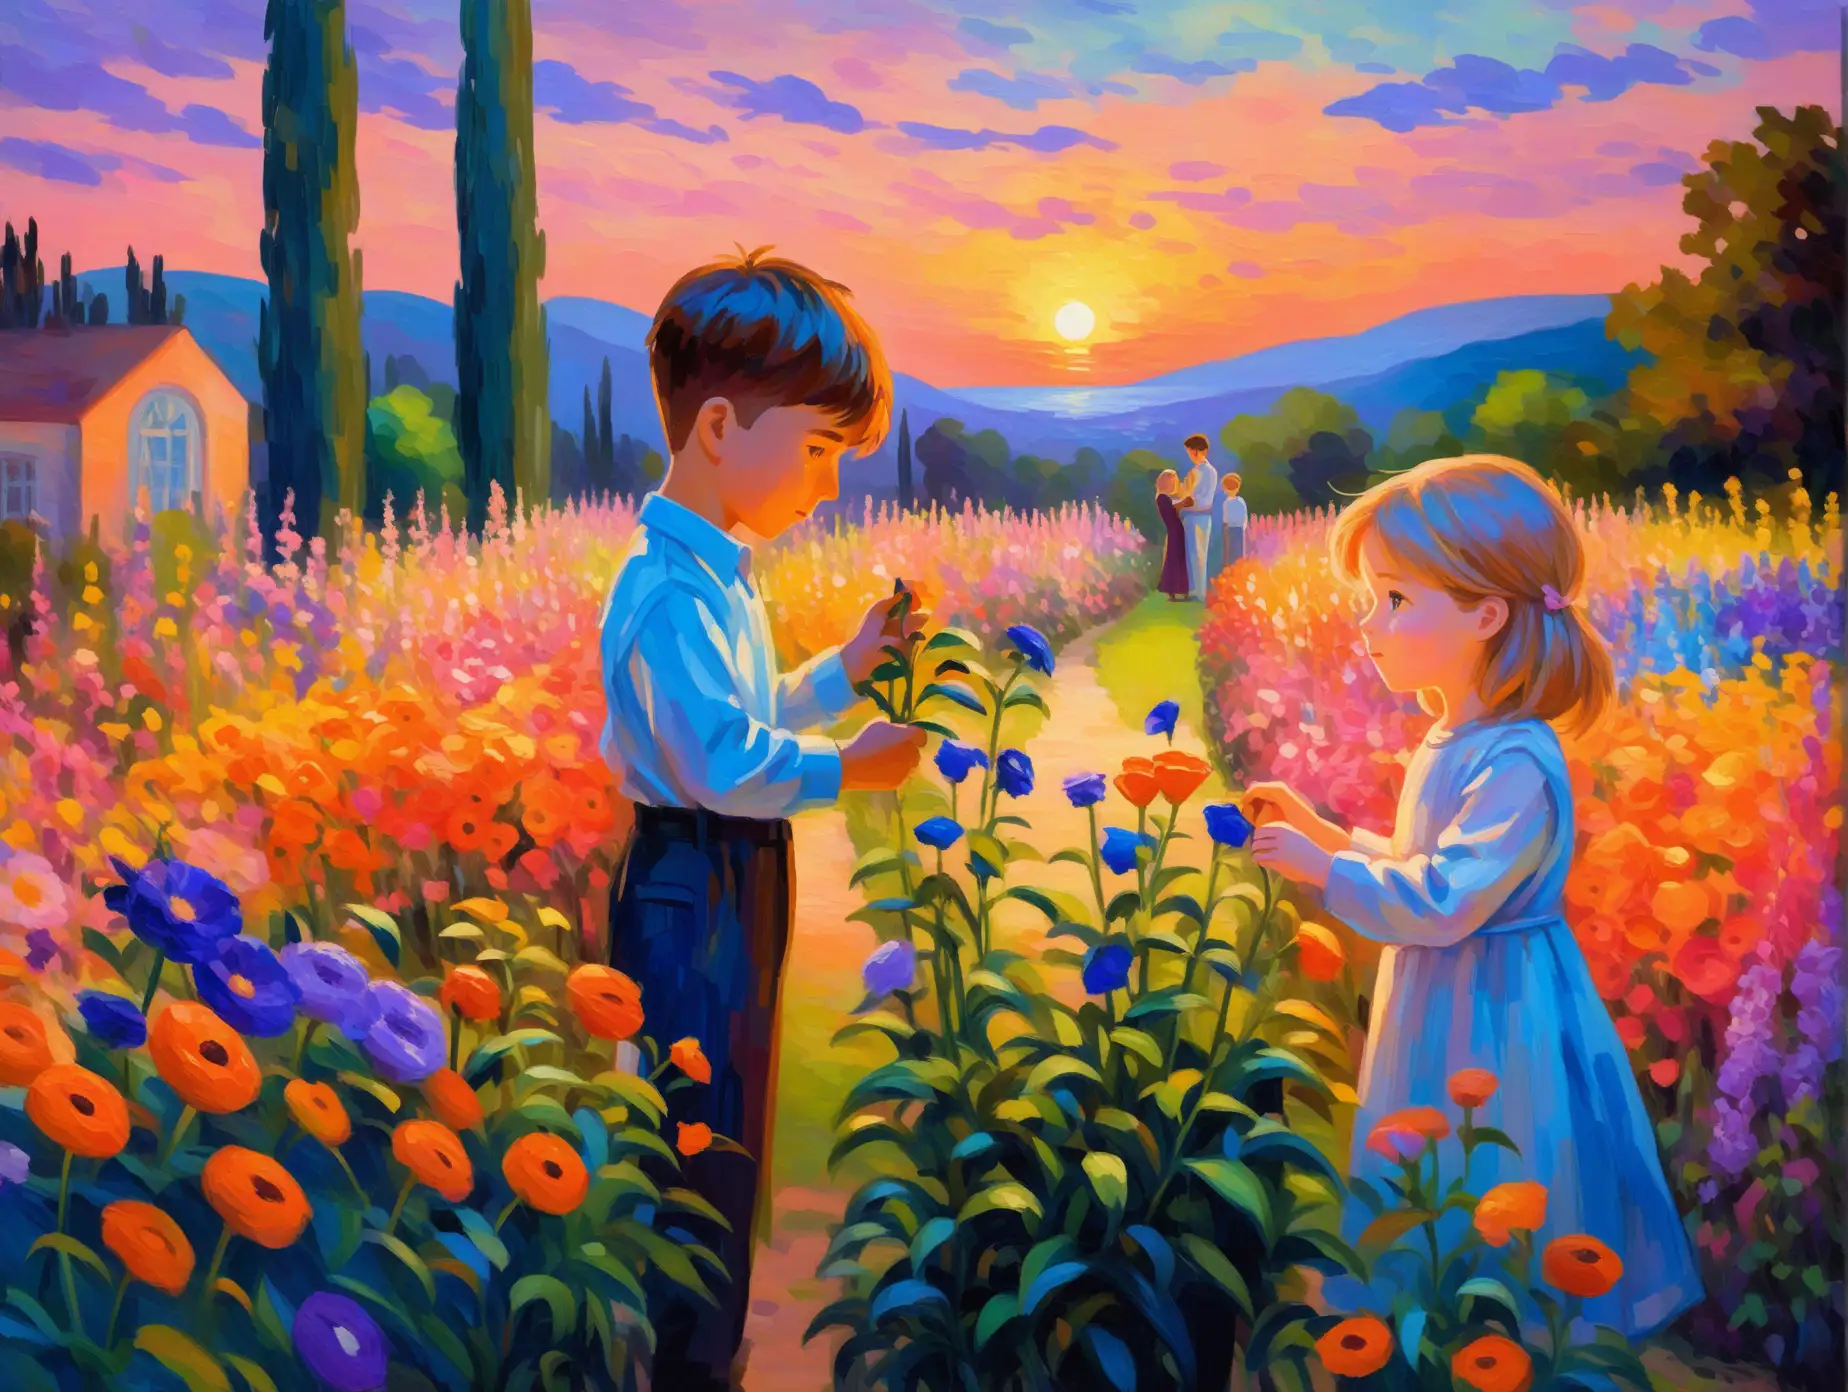 Young boy and girl facing toward each other, closely examining a four-o'clock flower opening in a colorful garden after sunset. In style of impressionist oil painting.